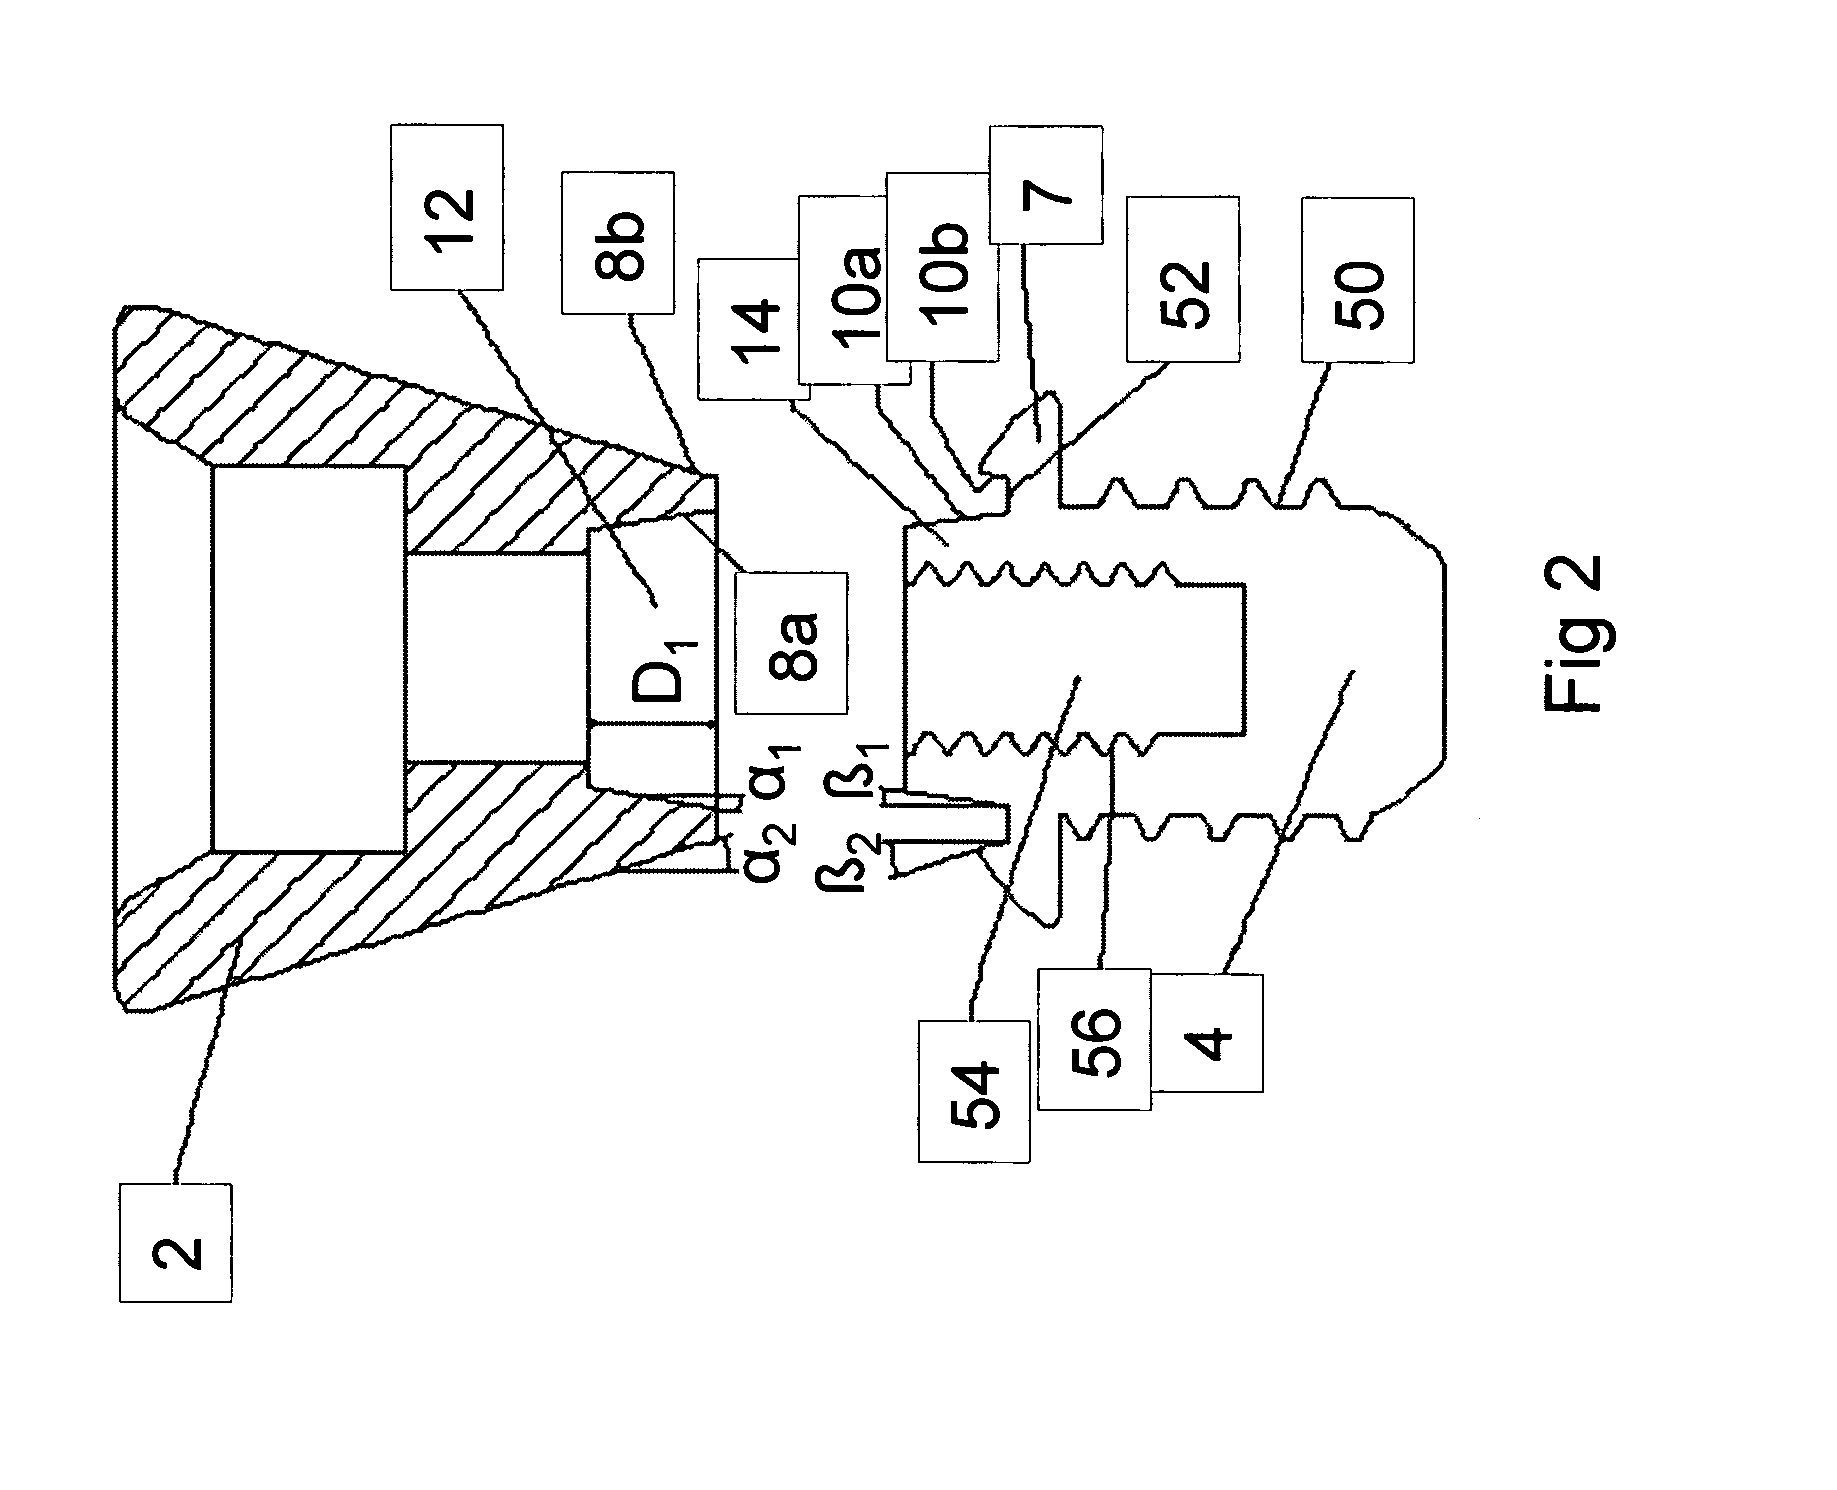 Hearing-aid interconnection system